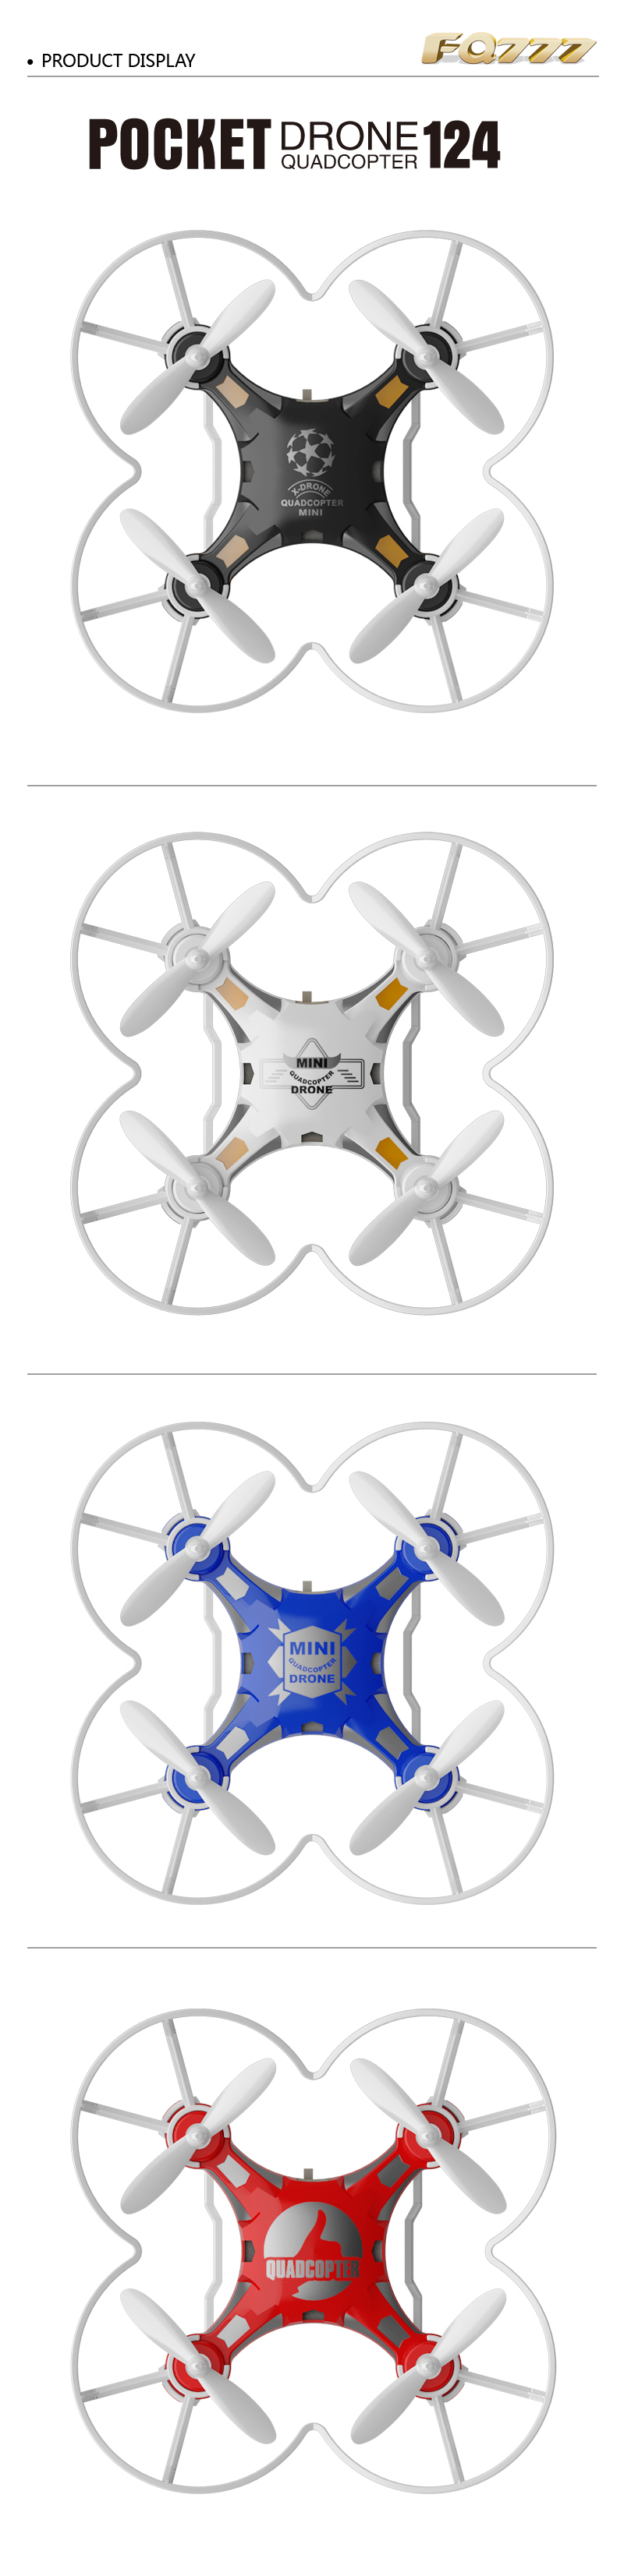 FQ777-124-Pocket-Drone-4CH-6Axis-Gyro-Drone-Quadcopter-With-Switchable-Controller--RTF-977881